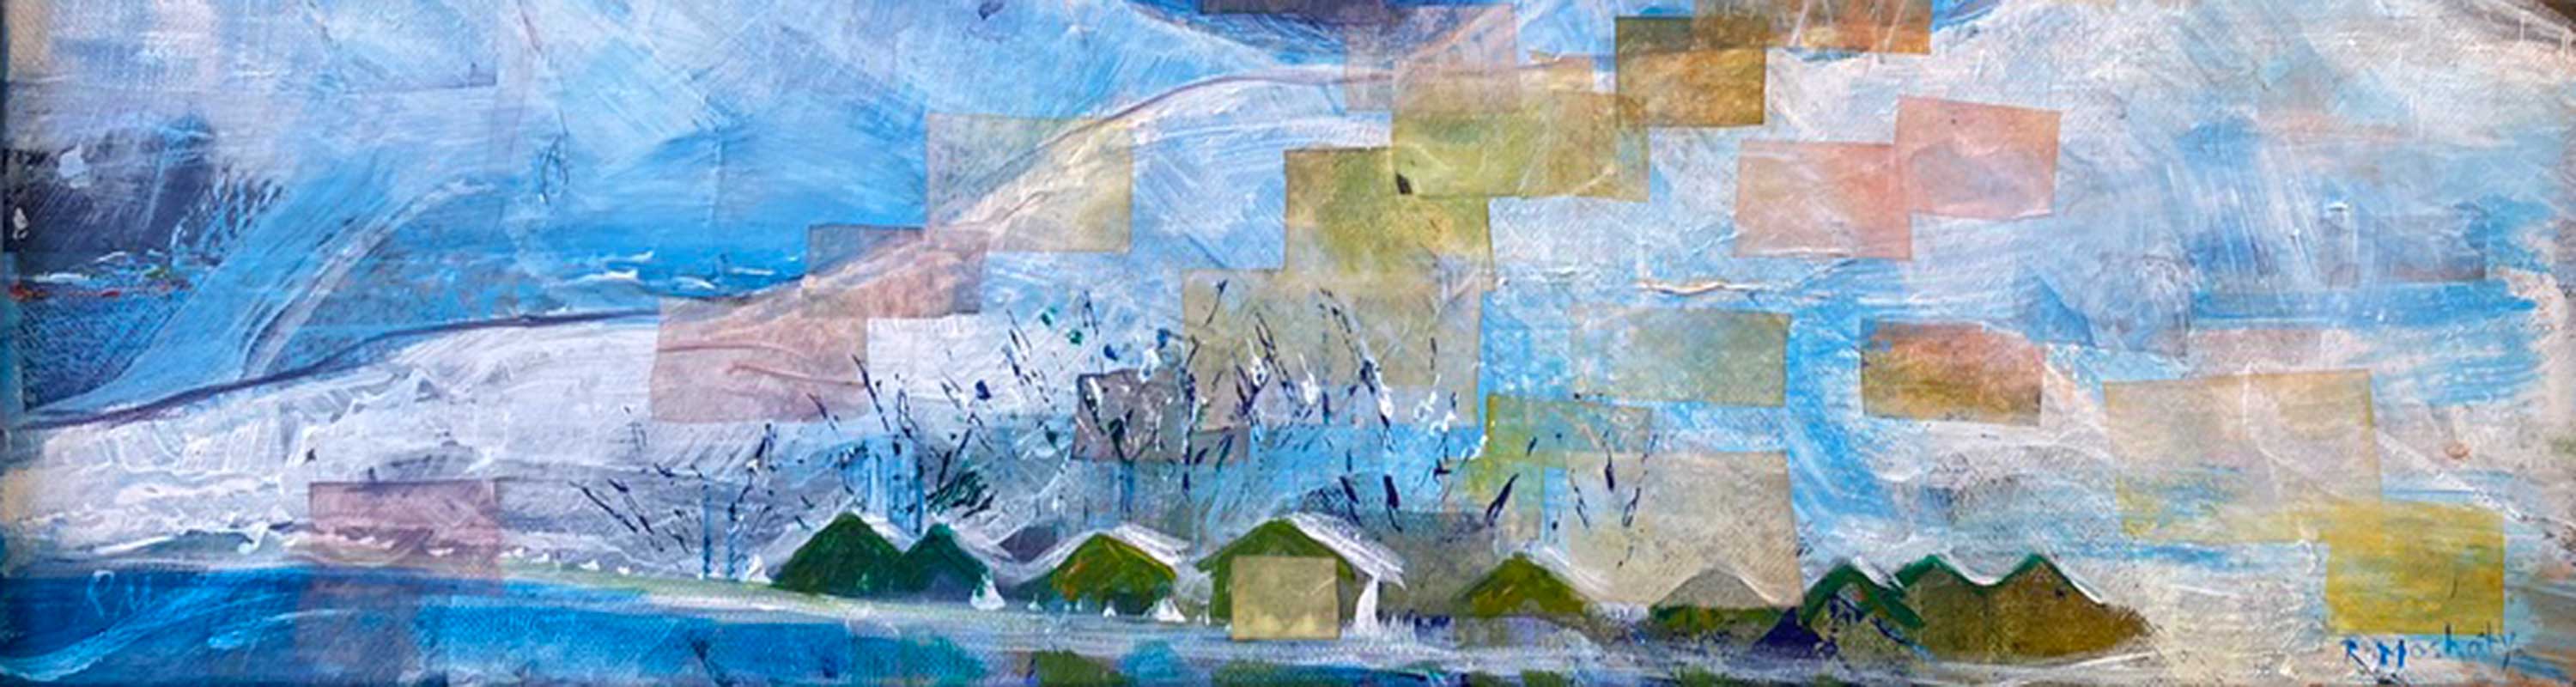 mixed media painting of Tully with mountains in background